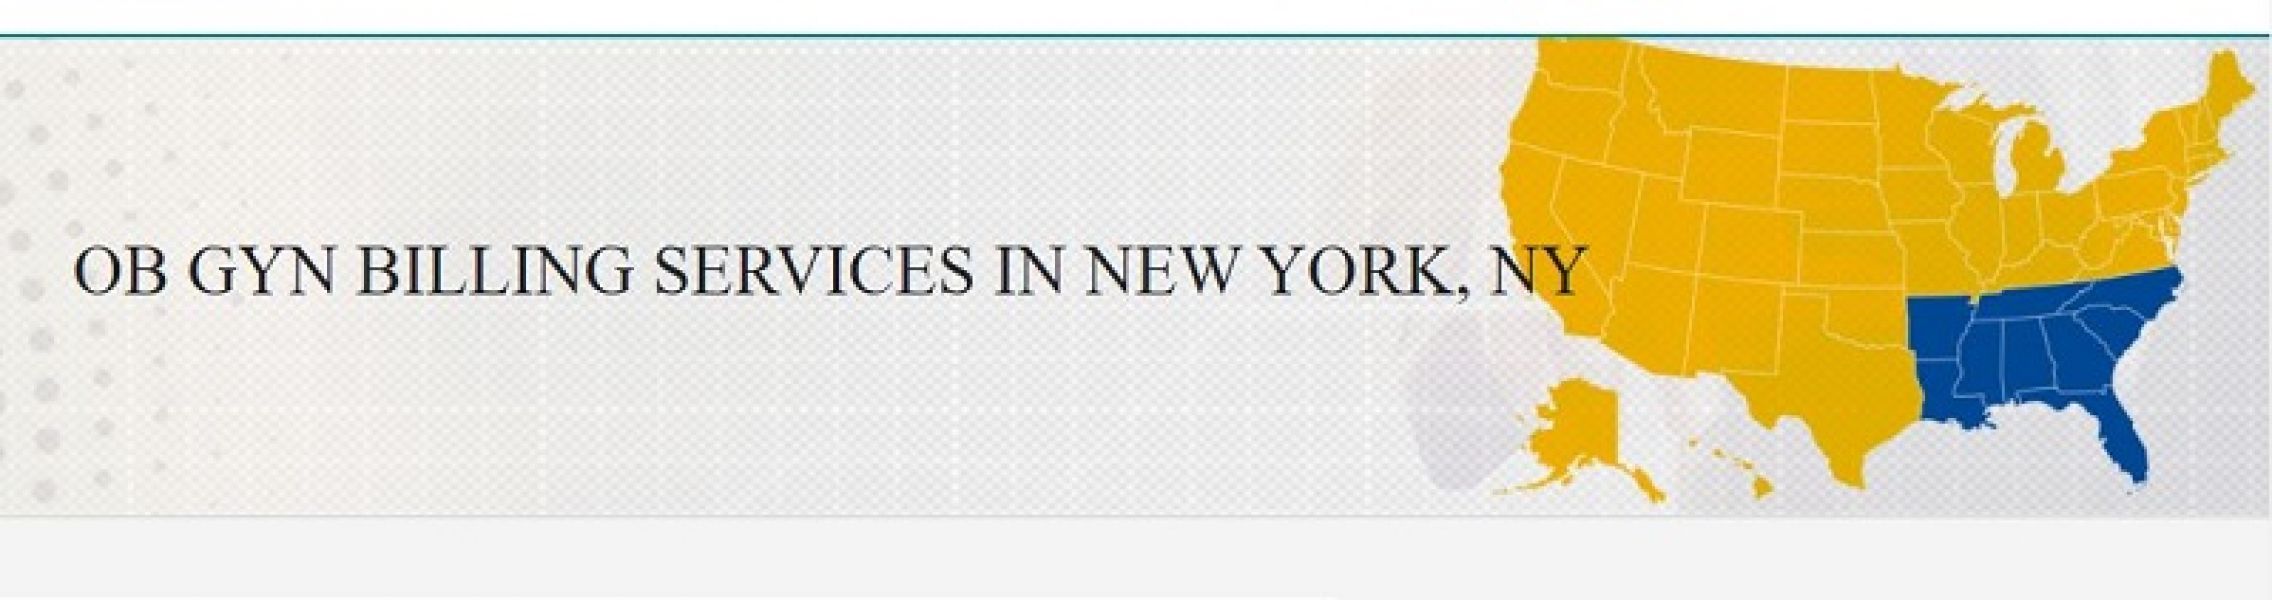 Experts in OB Gyn Billing Services for New York, NY